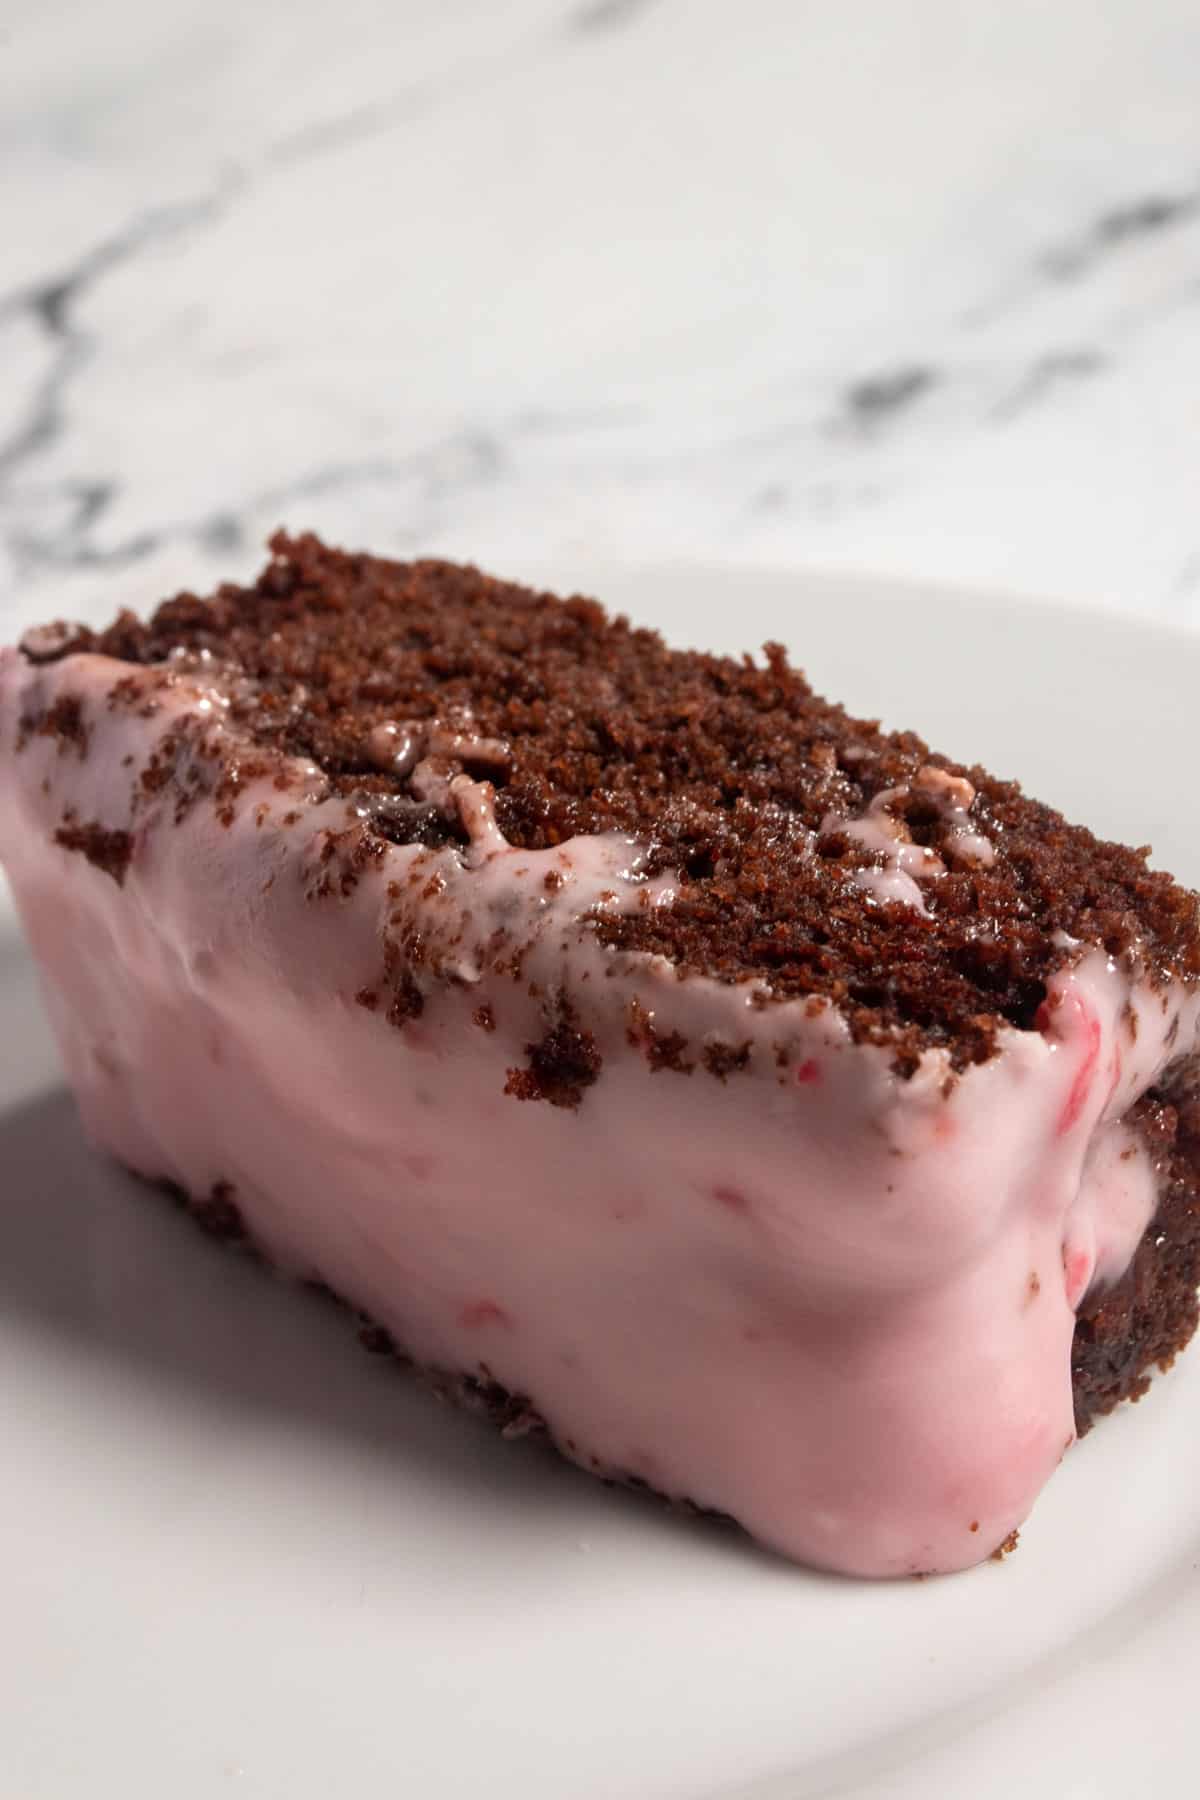 A thick slice of vegan chocolate raspberry cake laying on its side. The crumb of the cake looks moist and fluffy. 